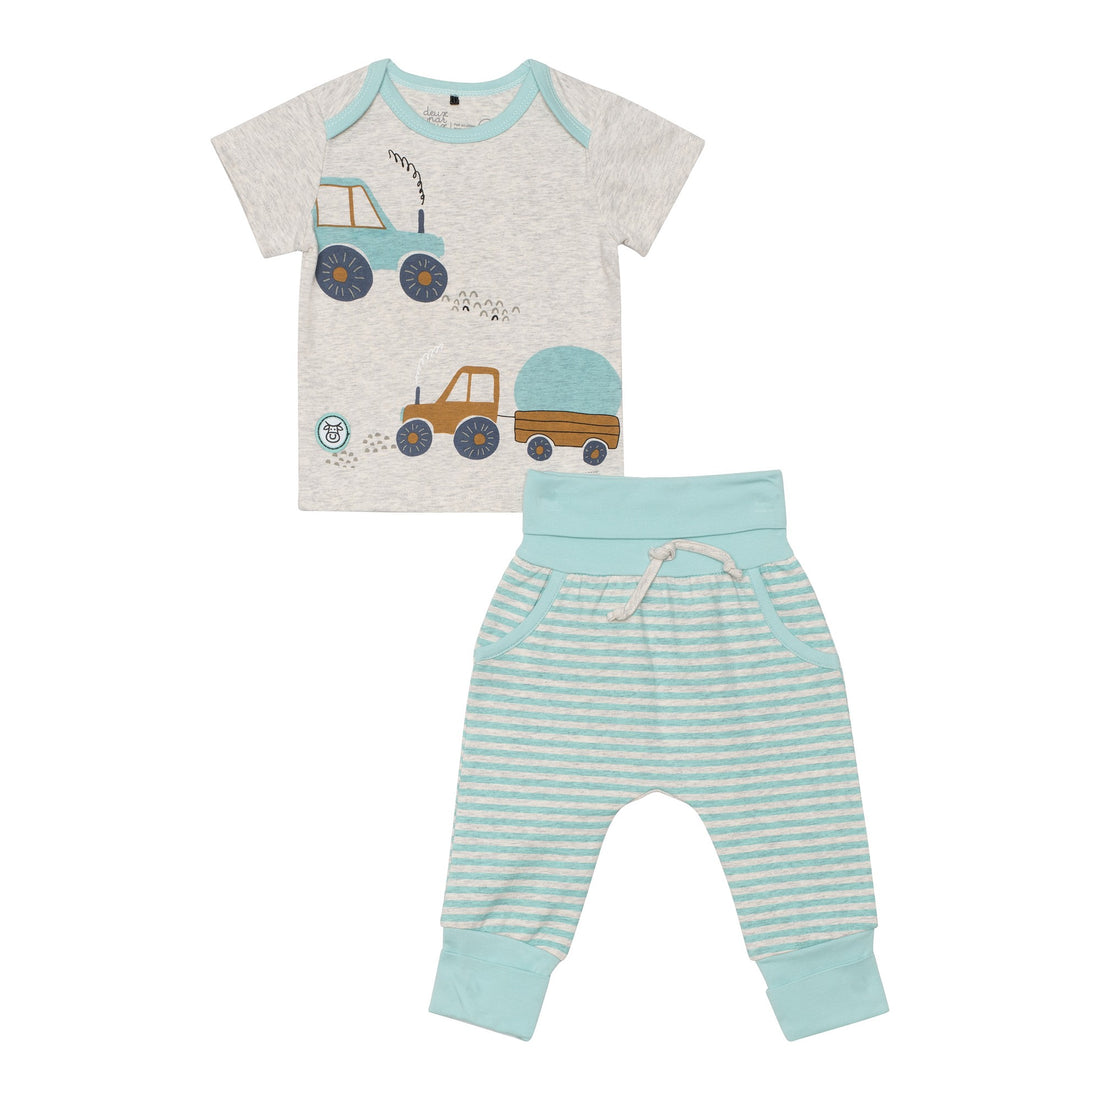 ORGANIC COTTON PRINTED TOP AND STRIPED EVOLUTIVE PANT SET, BABY BOY